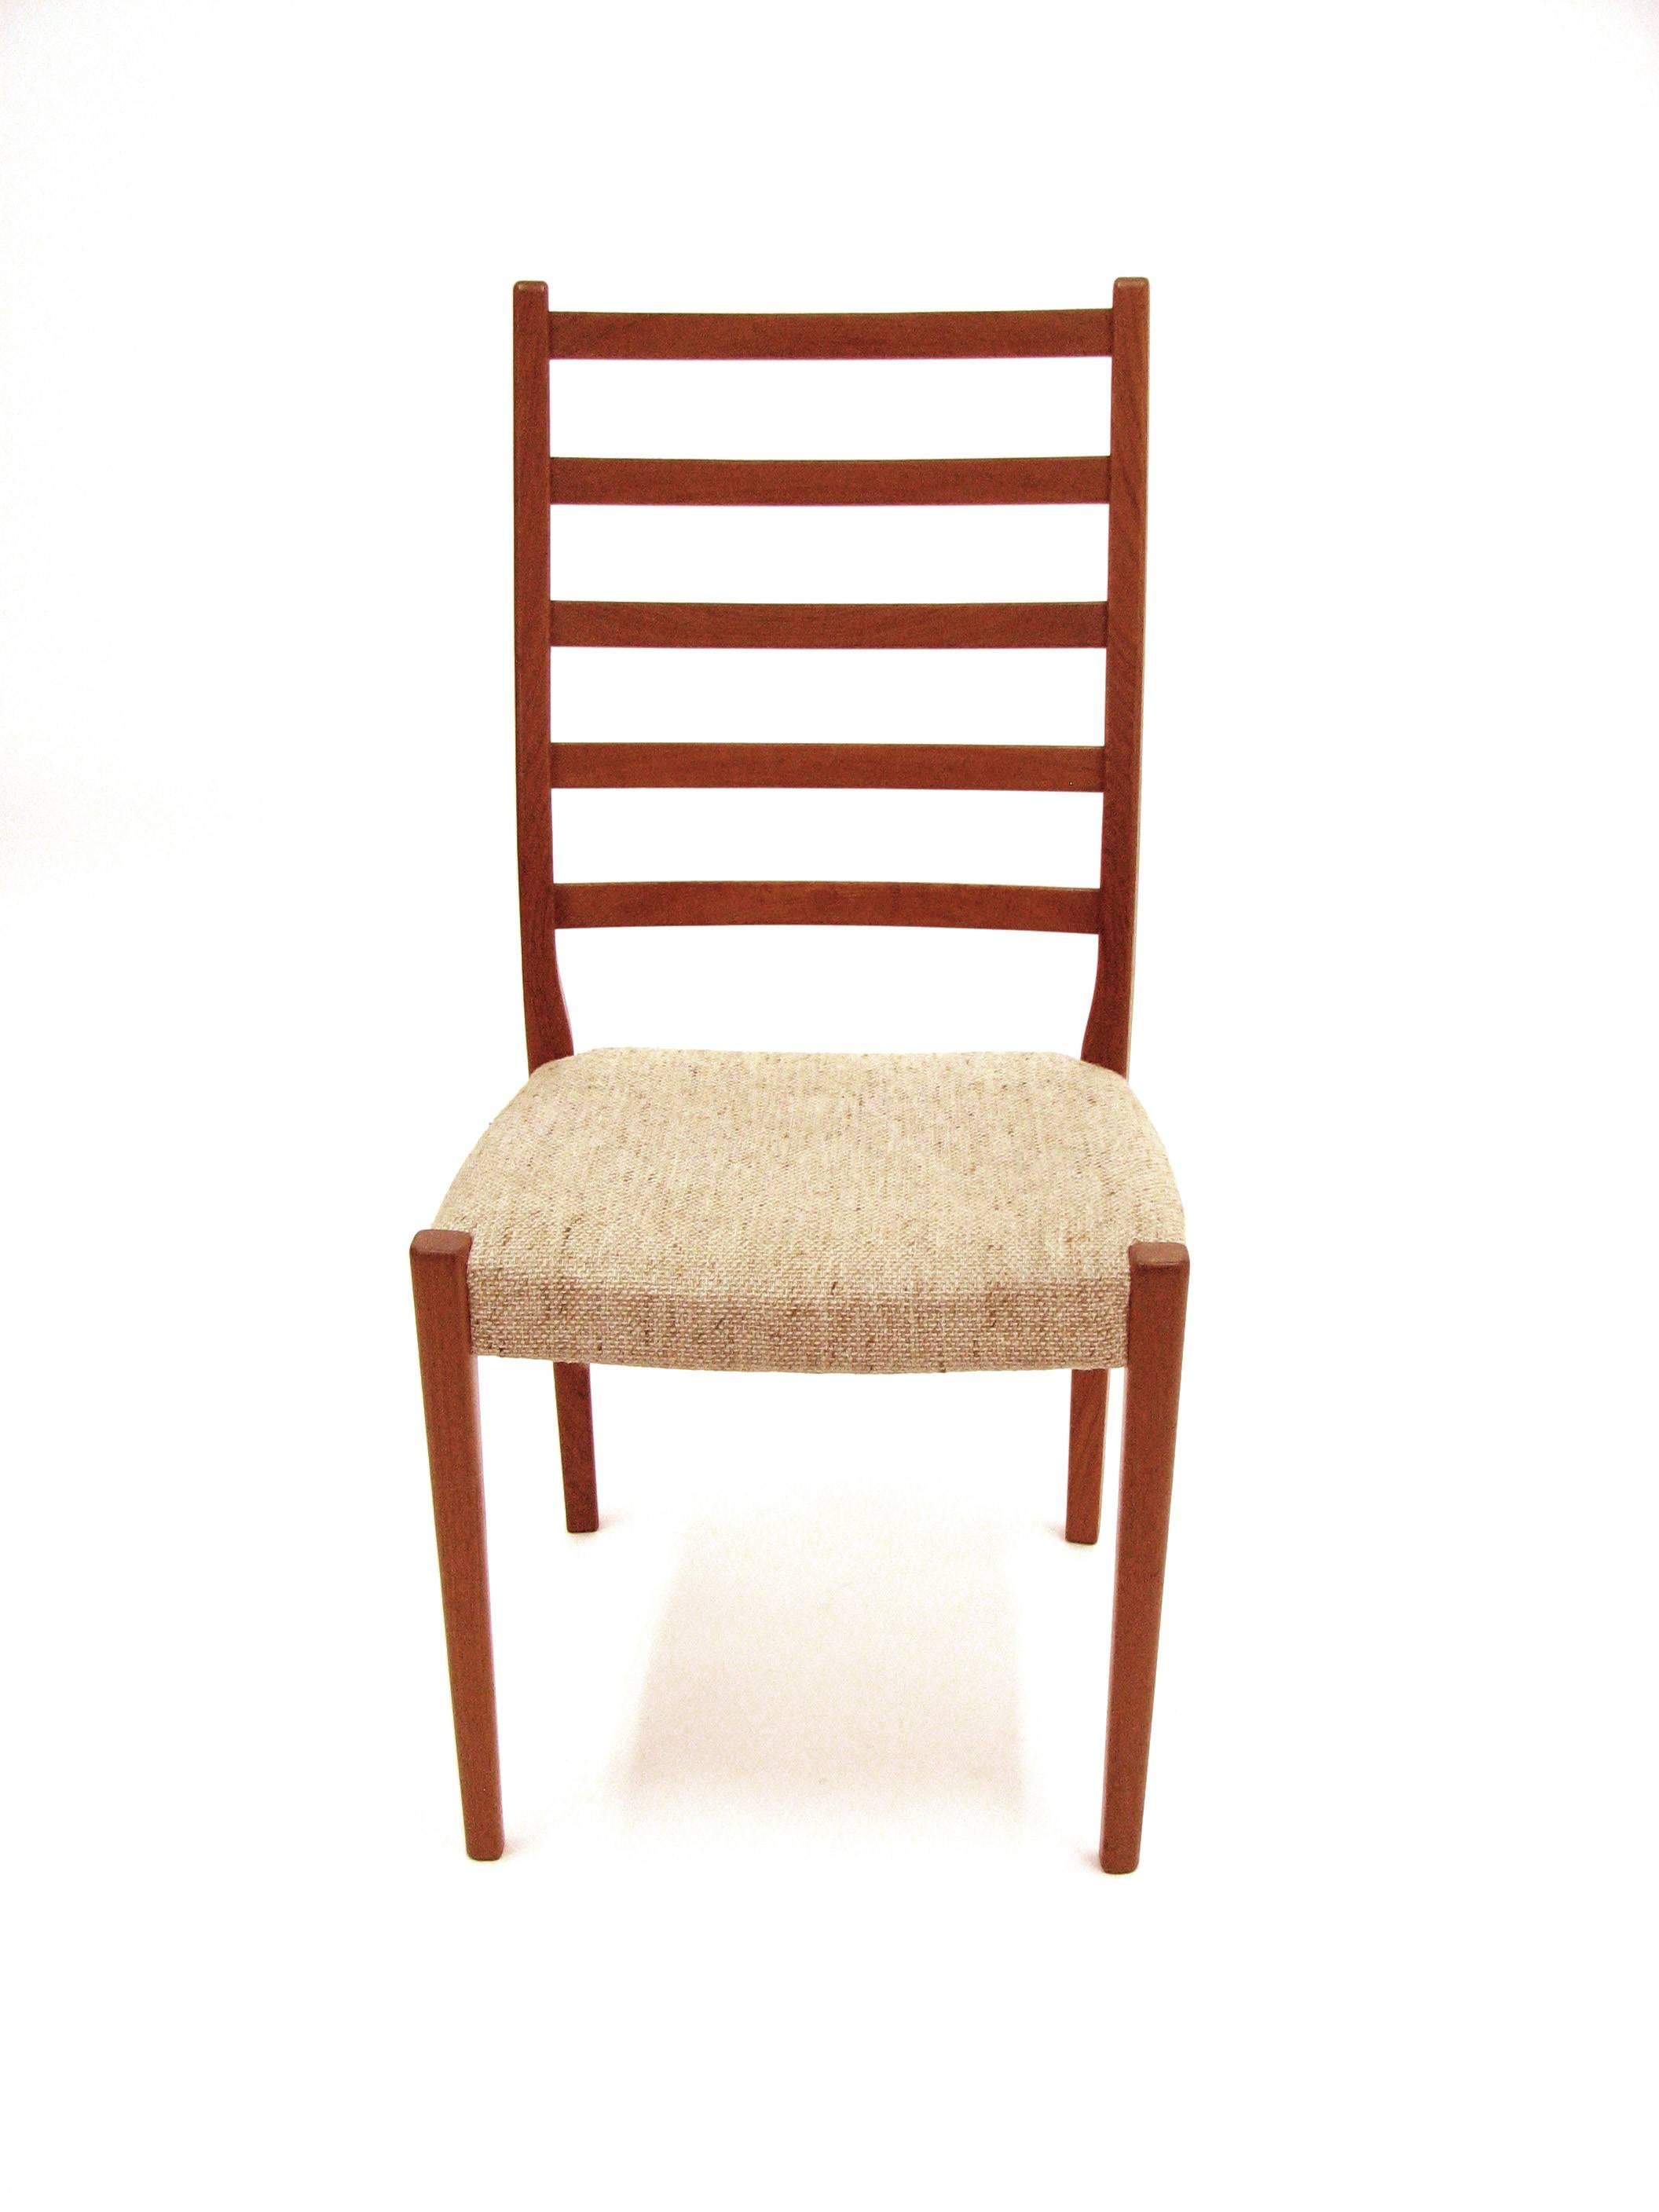 A handsome set of four teak ladder back dining chairs by Svegards Markaryd with original wool weave upholstery.

Chairs are burnt marked Svegards Markaryd made in Sweden.

Please note: Pickup for these chairs is in Denver, Colorado.